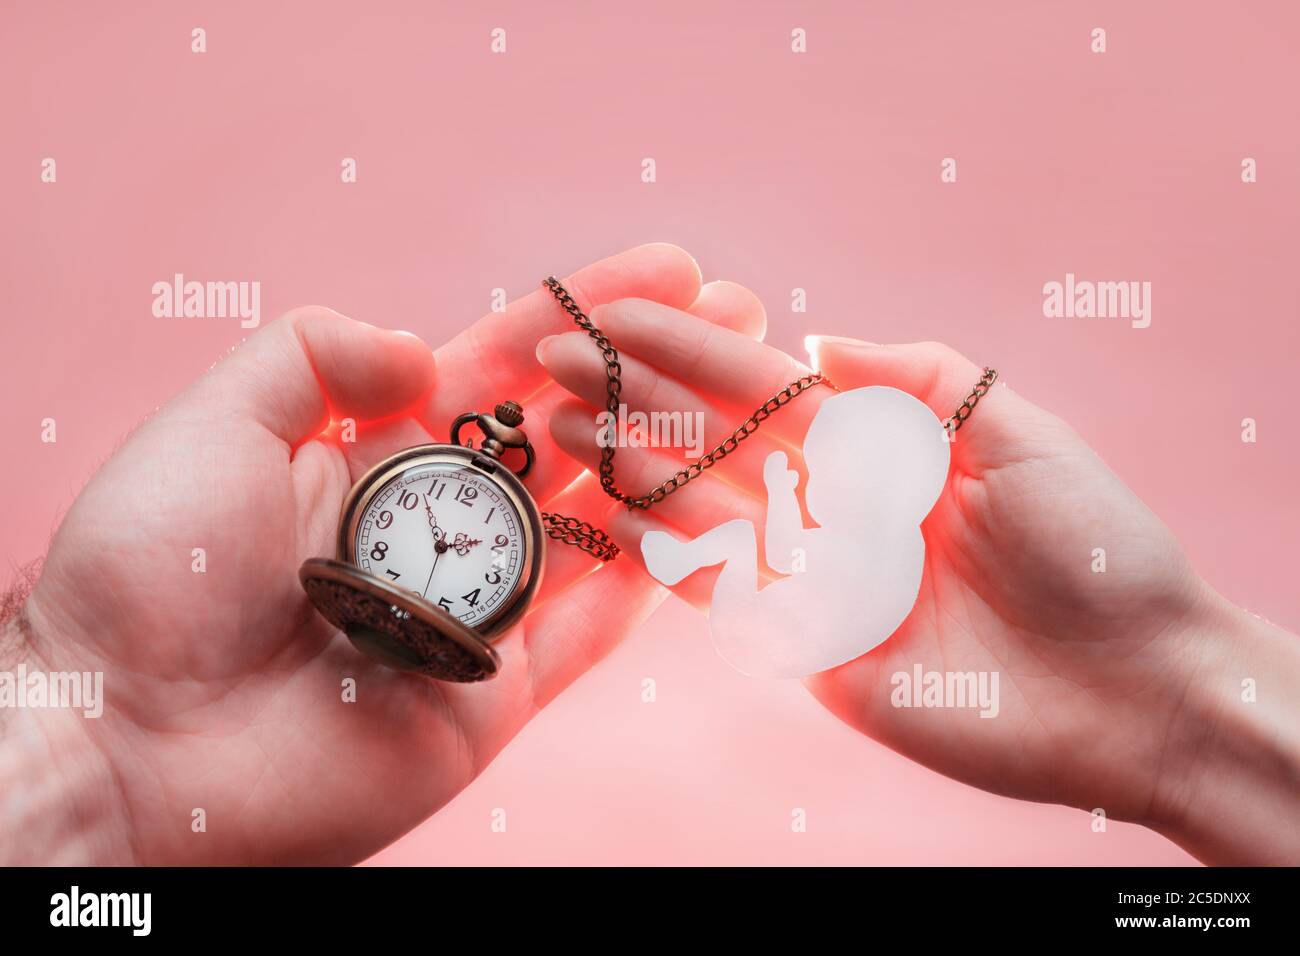 Hands of woman and man holding a silhouette of a child and clock. Paper silhouette and time before the birth of the child Stock Photo